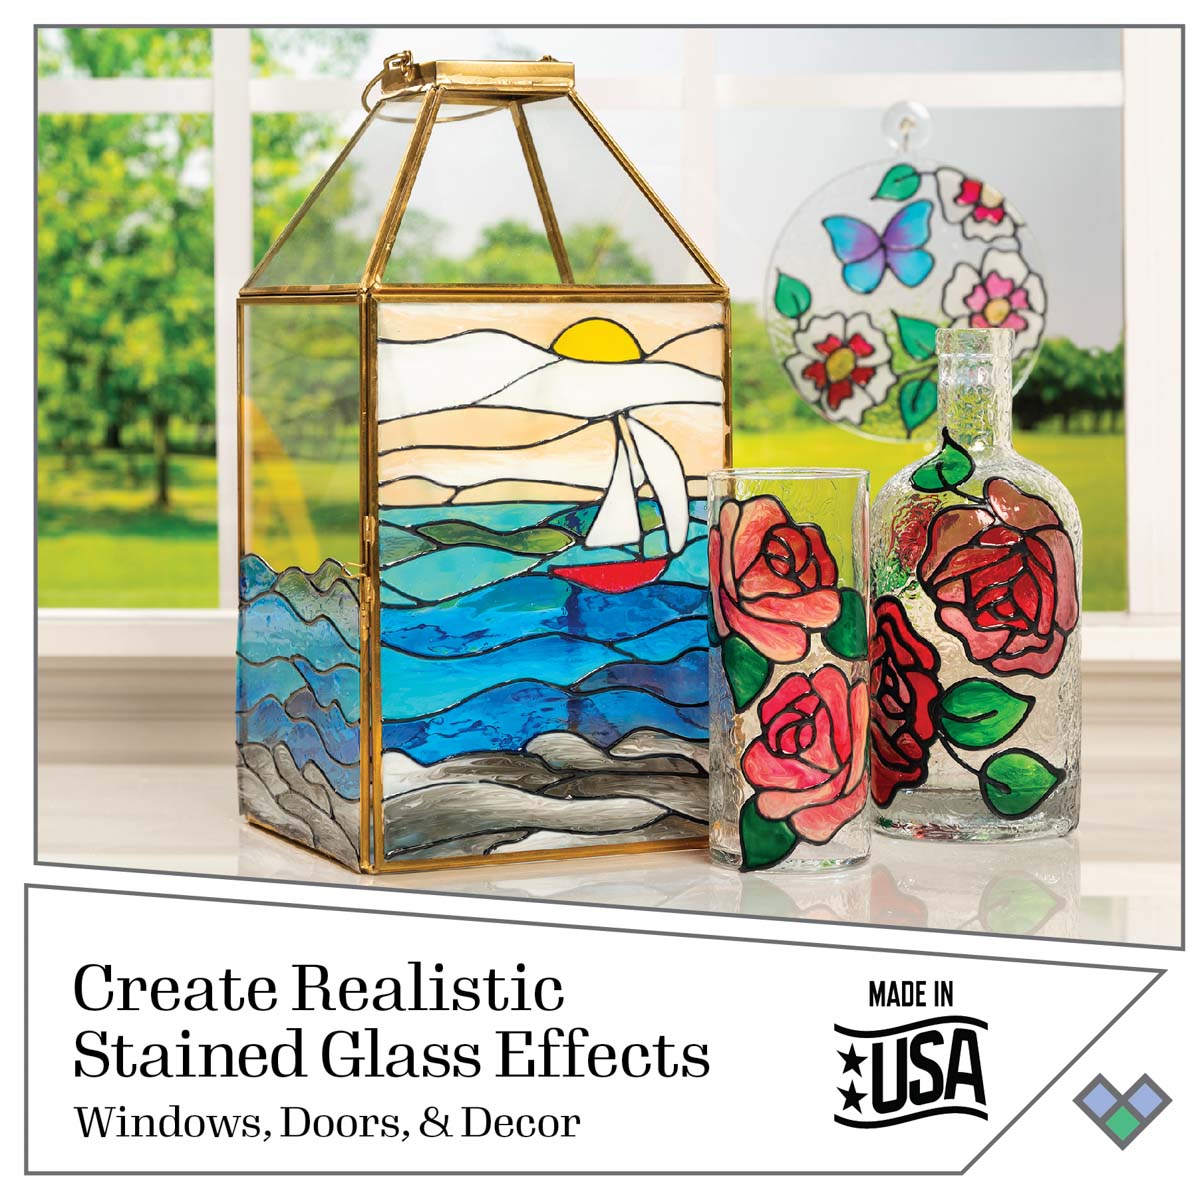 Gallery Glass PROMOGGSTR22 Stained Glass Painting Starter Kit, 10 Piece Set Including 6 Colors, 1 Bottle of Liquid Leading, 2 Plastic Surfaces and 1